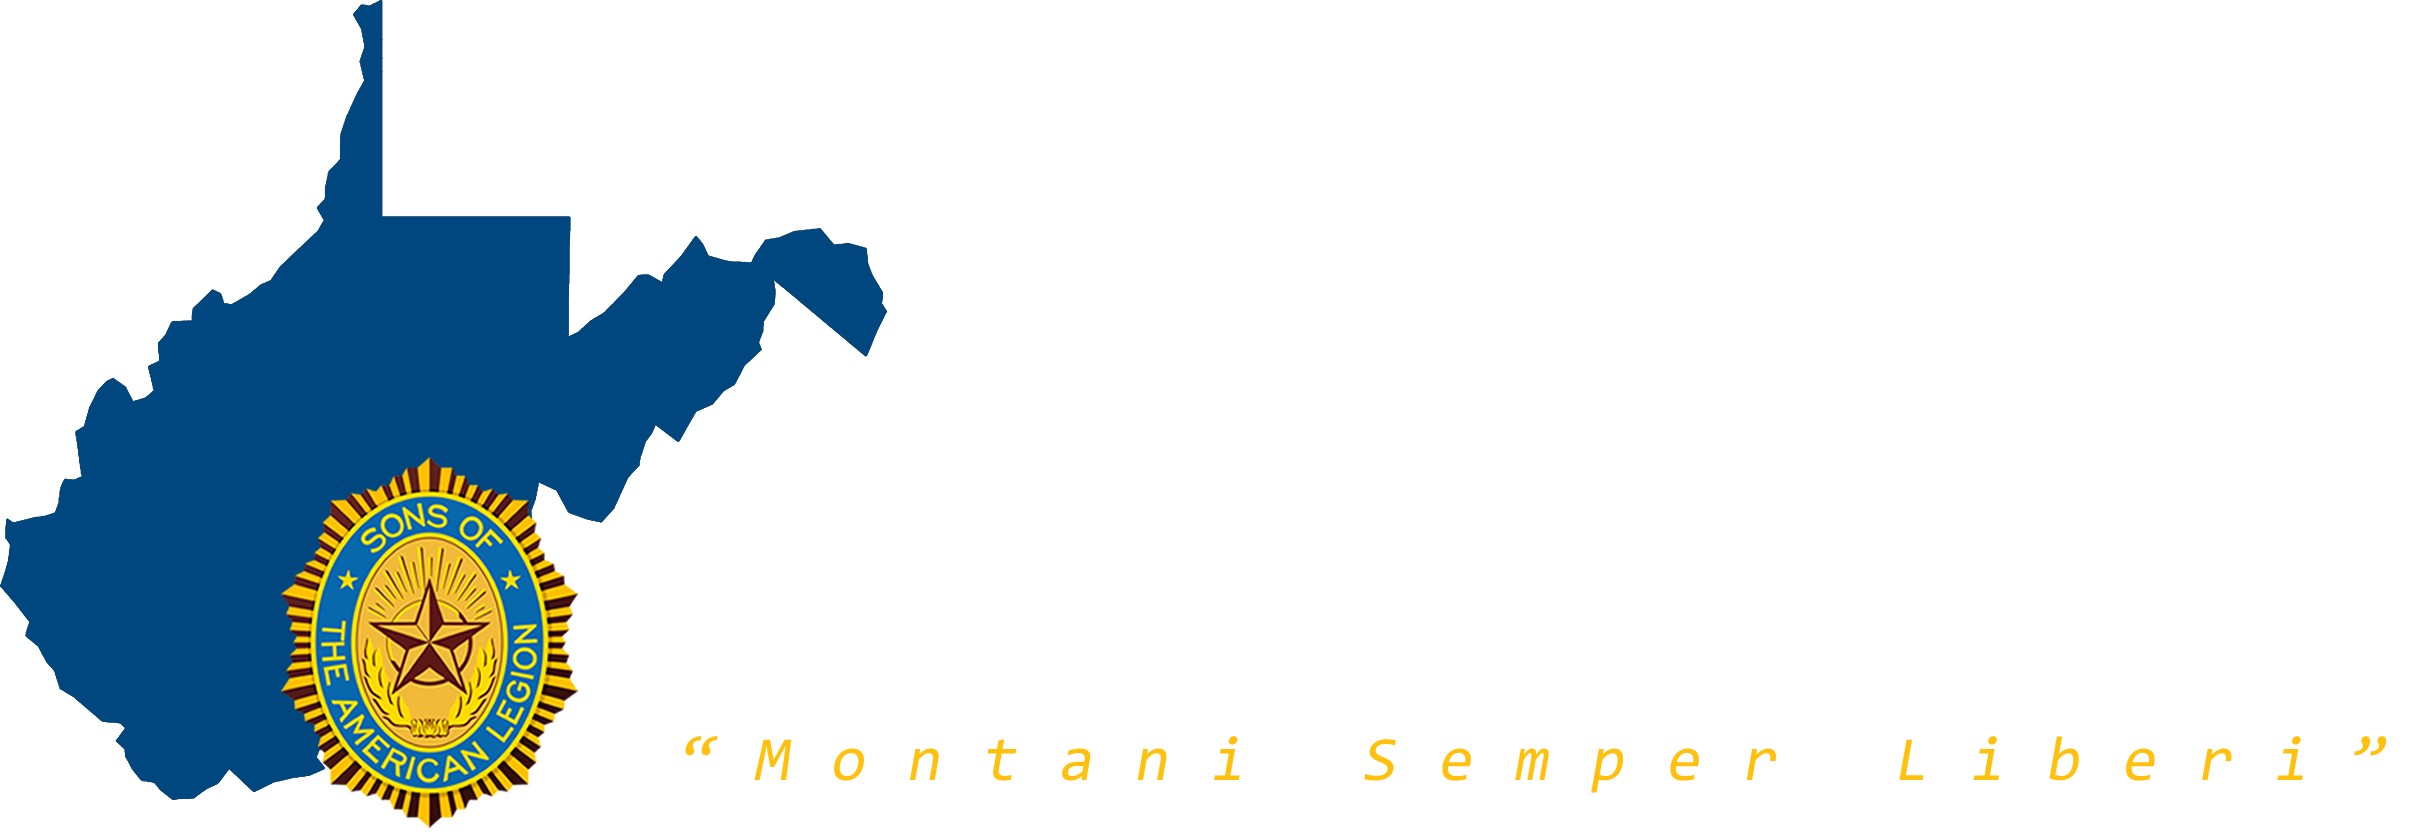 Sons of The American Legion Detachment of West Virginia